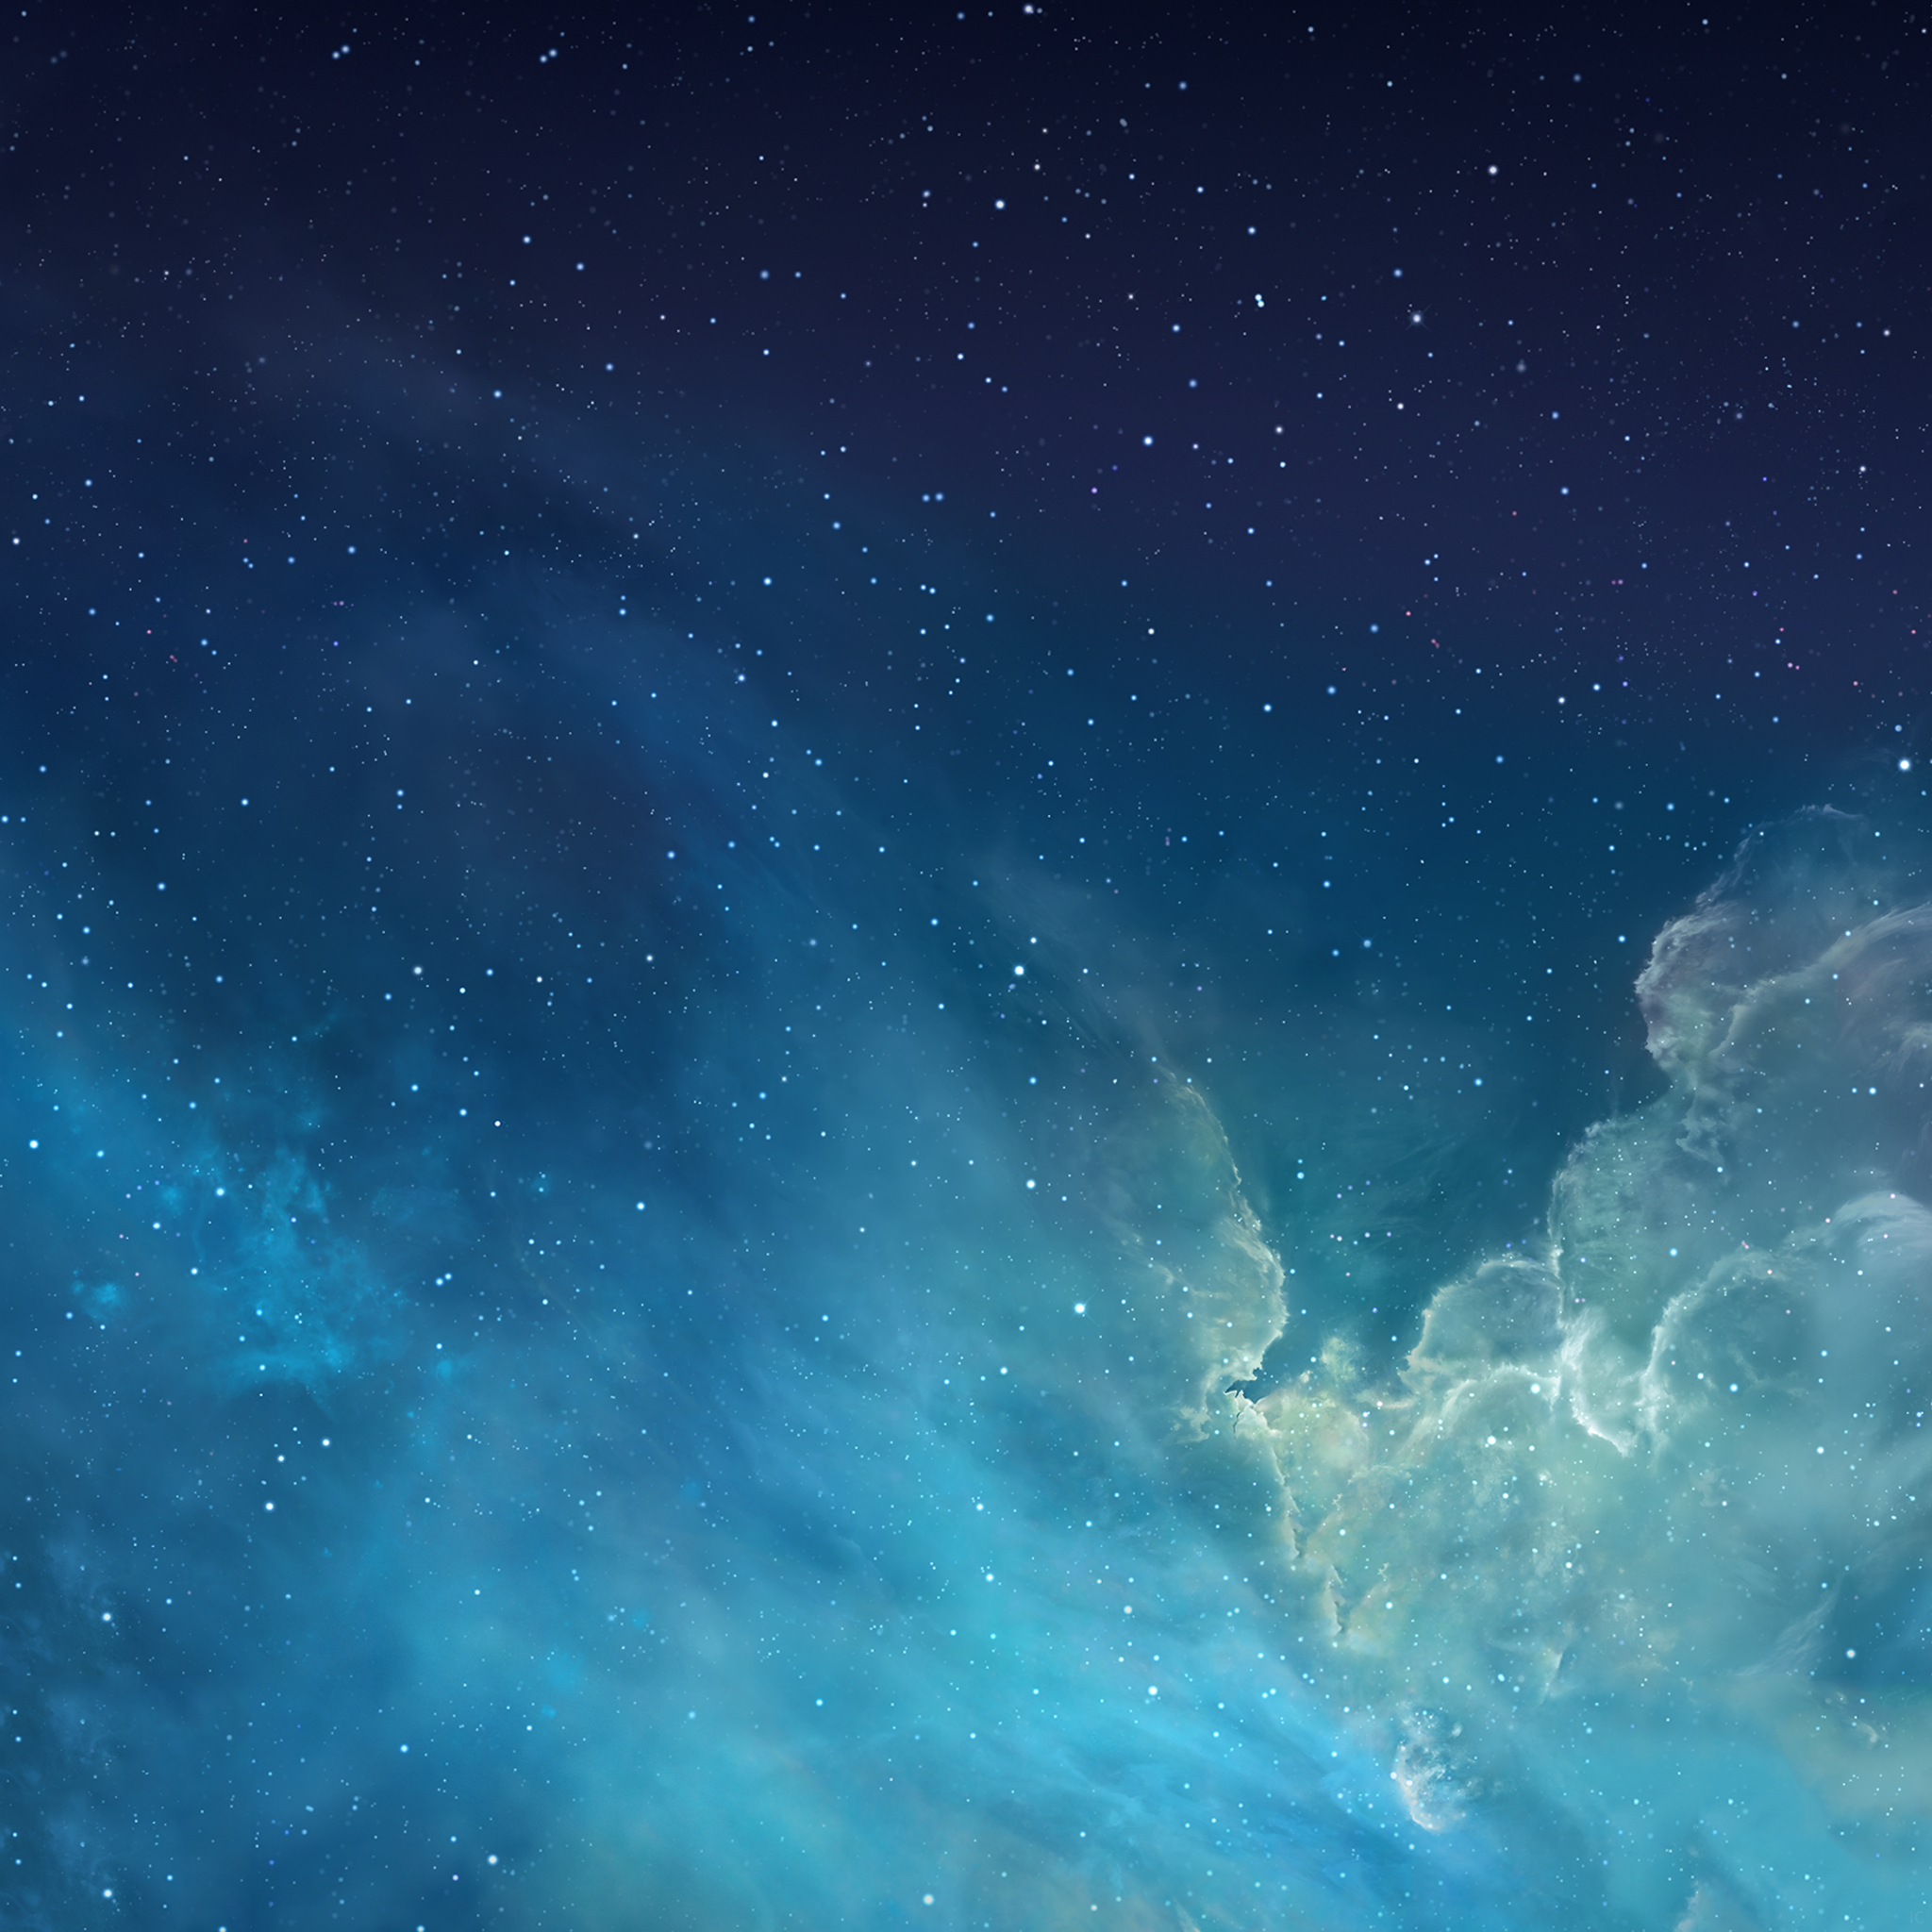 You might recognize this one from the initial iOS 7 beta wallpaper